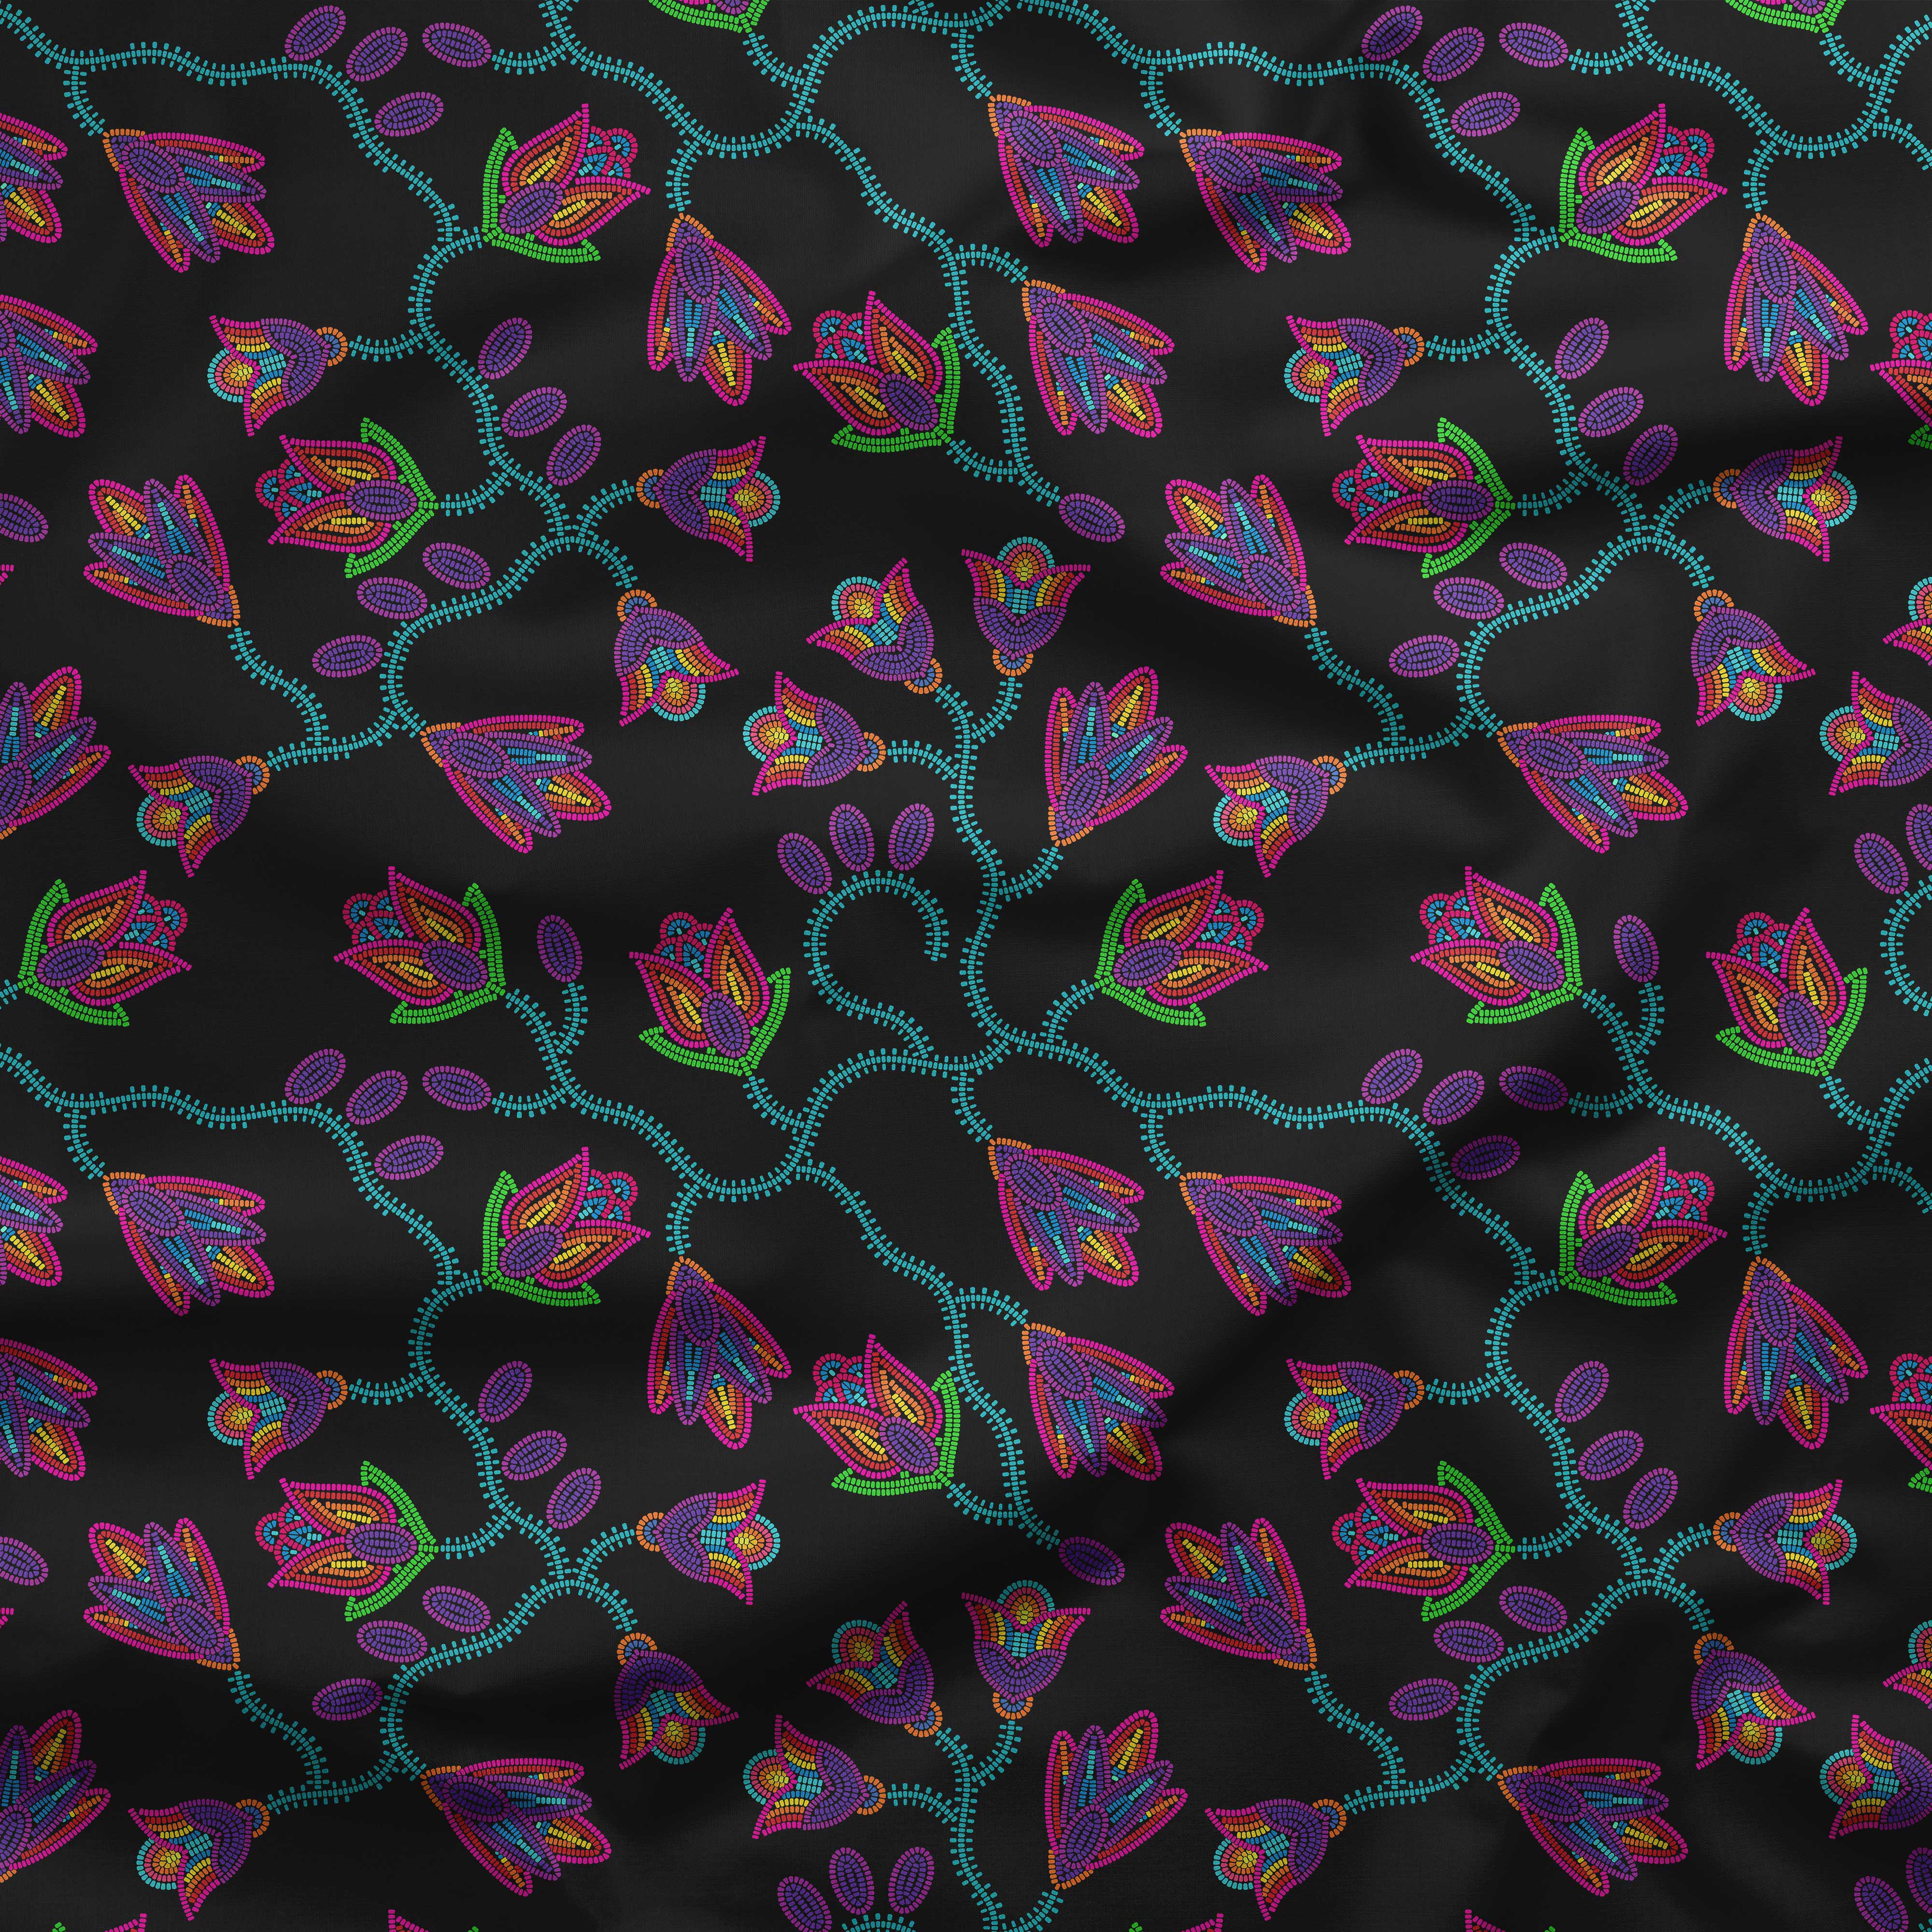 Spring Blossoms Black Cotton Poplin Fabric By the Yard